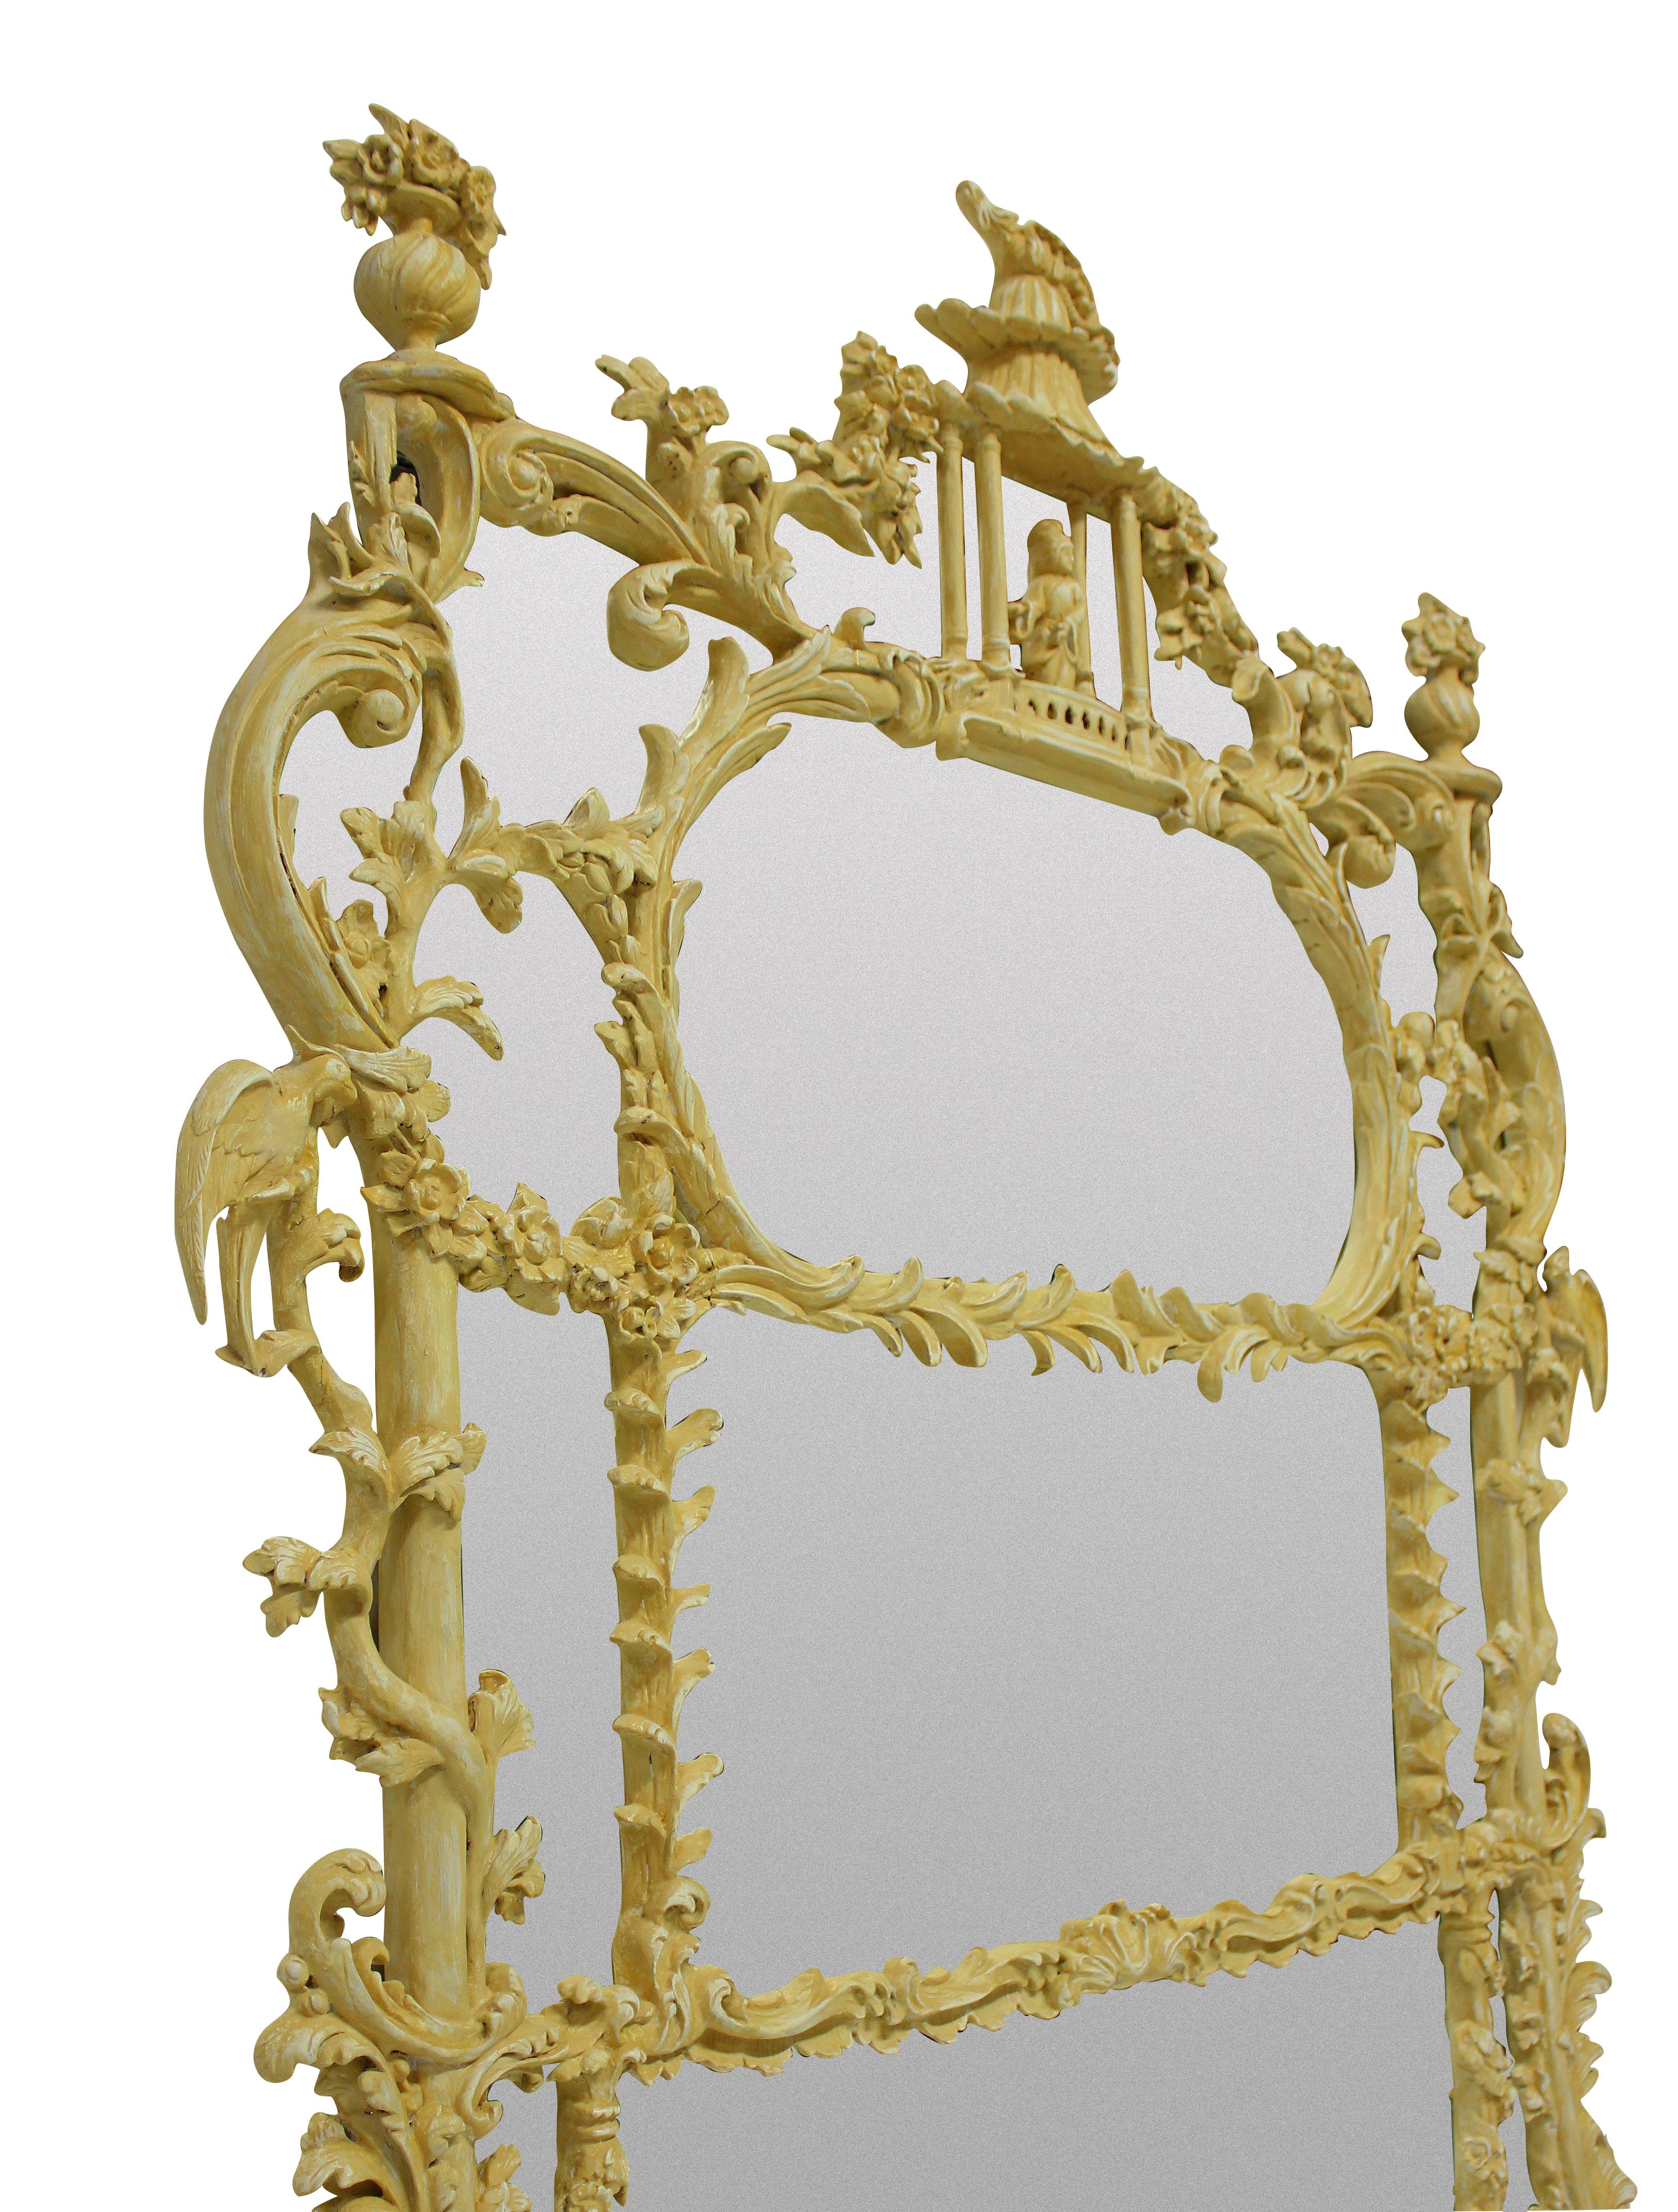 A beautifully carved Chinese Chippendale revival overmantle mirror in ochre bole. Depicting foliage, ho ho birds and flowers with a central pagoda and figure at the top.